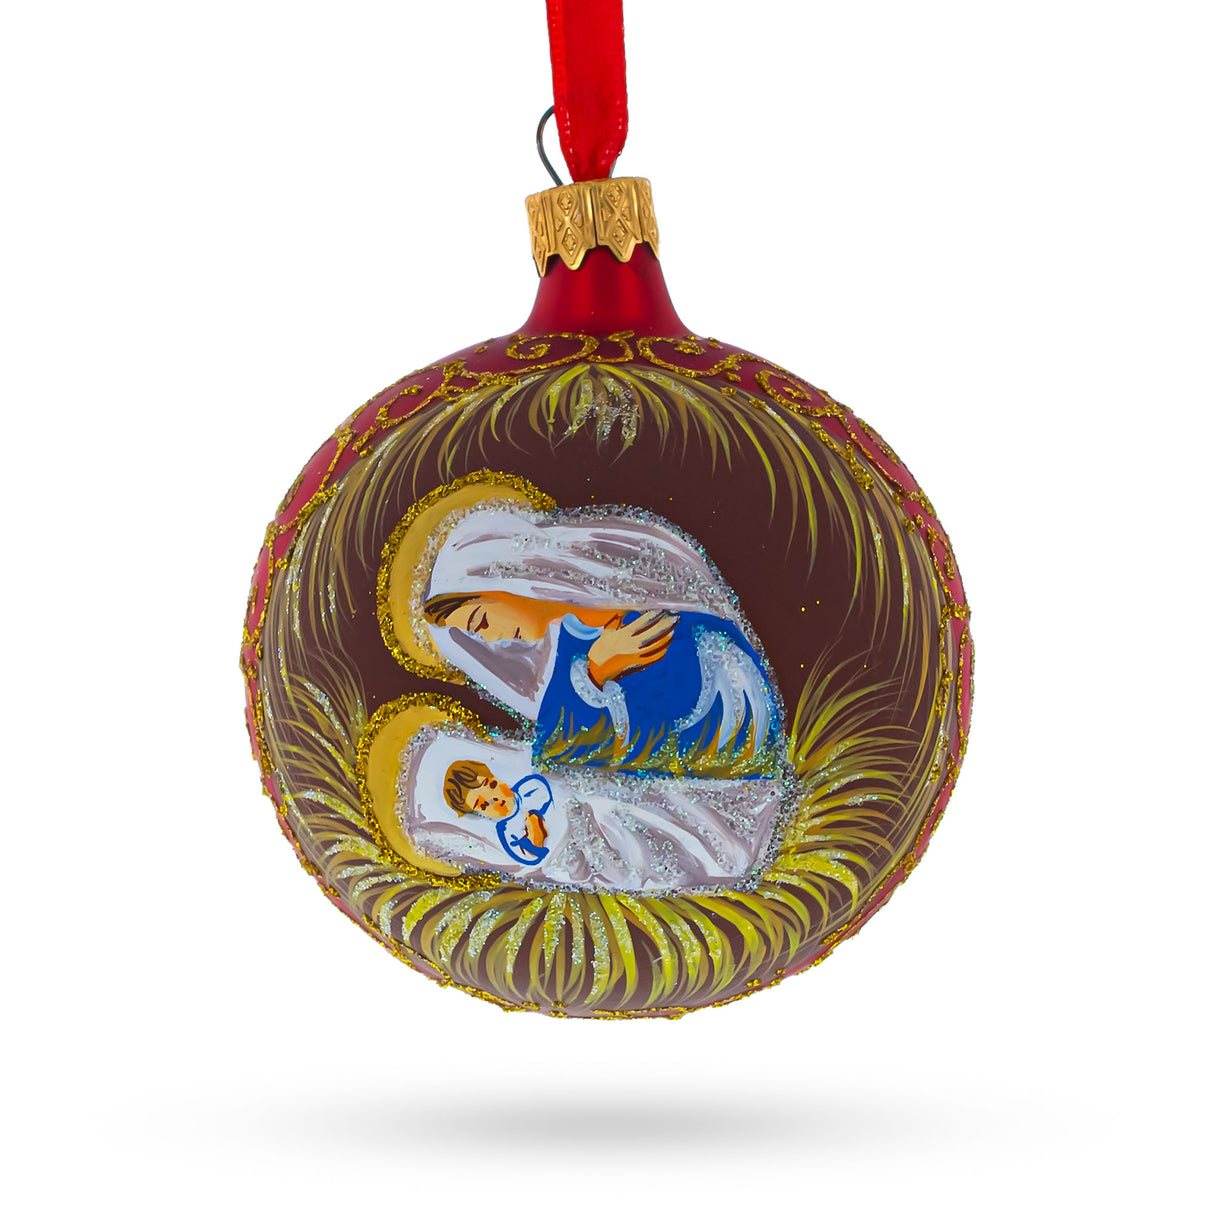 Sacred Mary Overlooking Jesus Nativity - Blown Glass Ball Christmas Ornament 3.25 Inches in Red color, Round shape